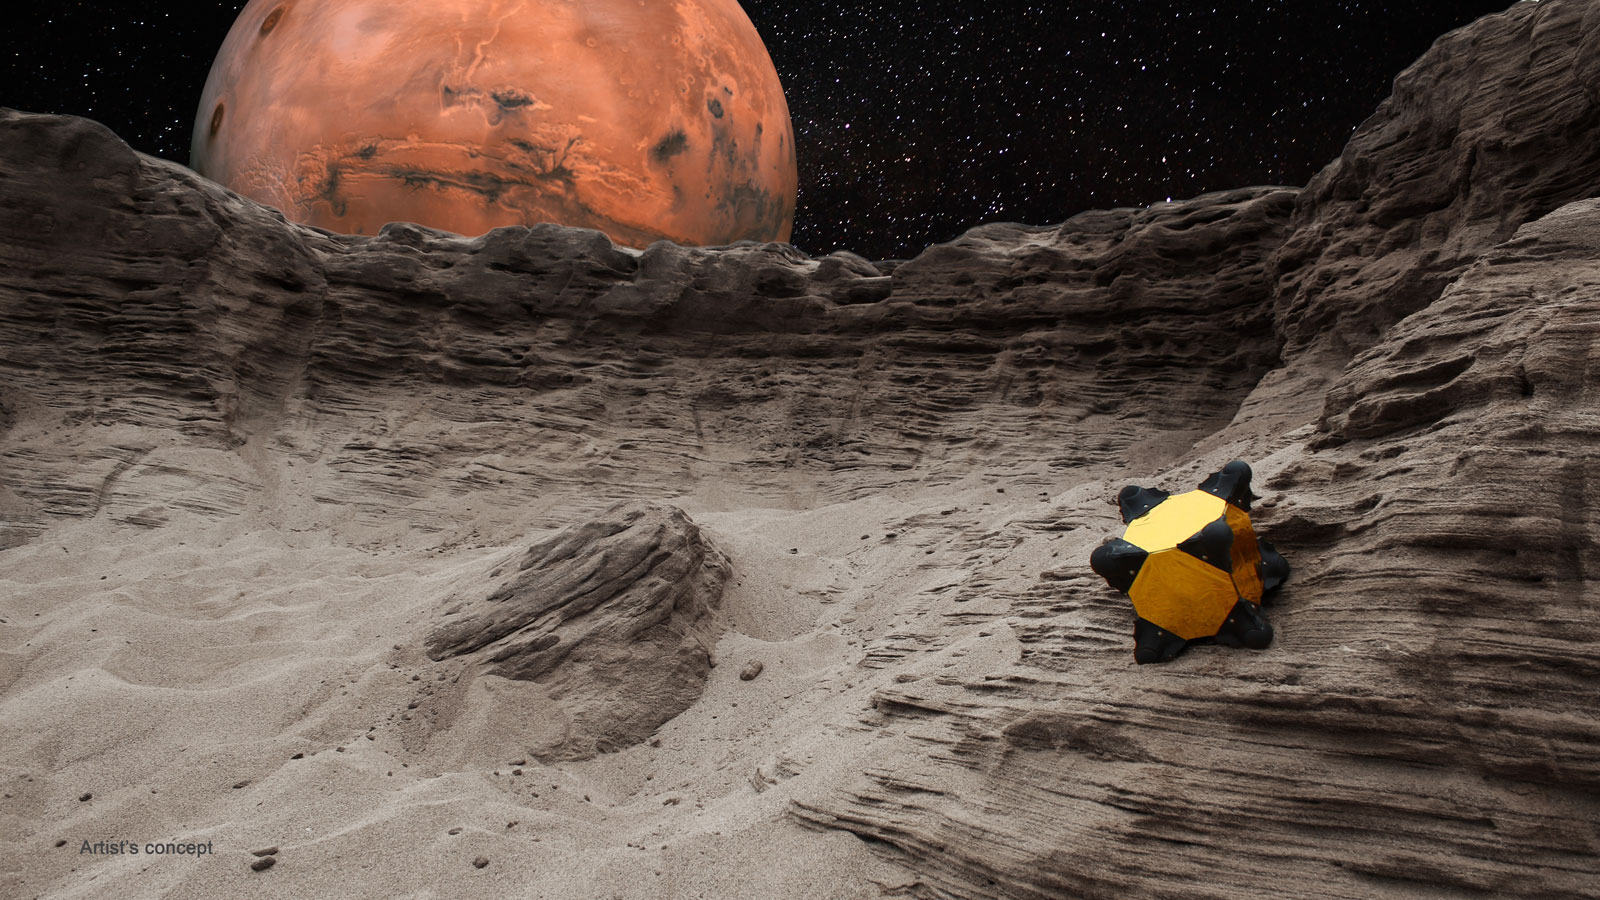 NASA’s “Hedgehog” concept could hop around on asteroids